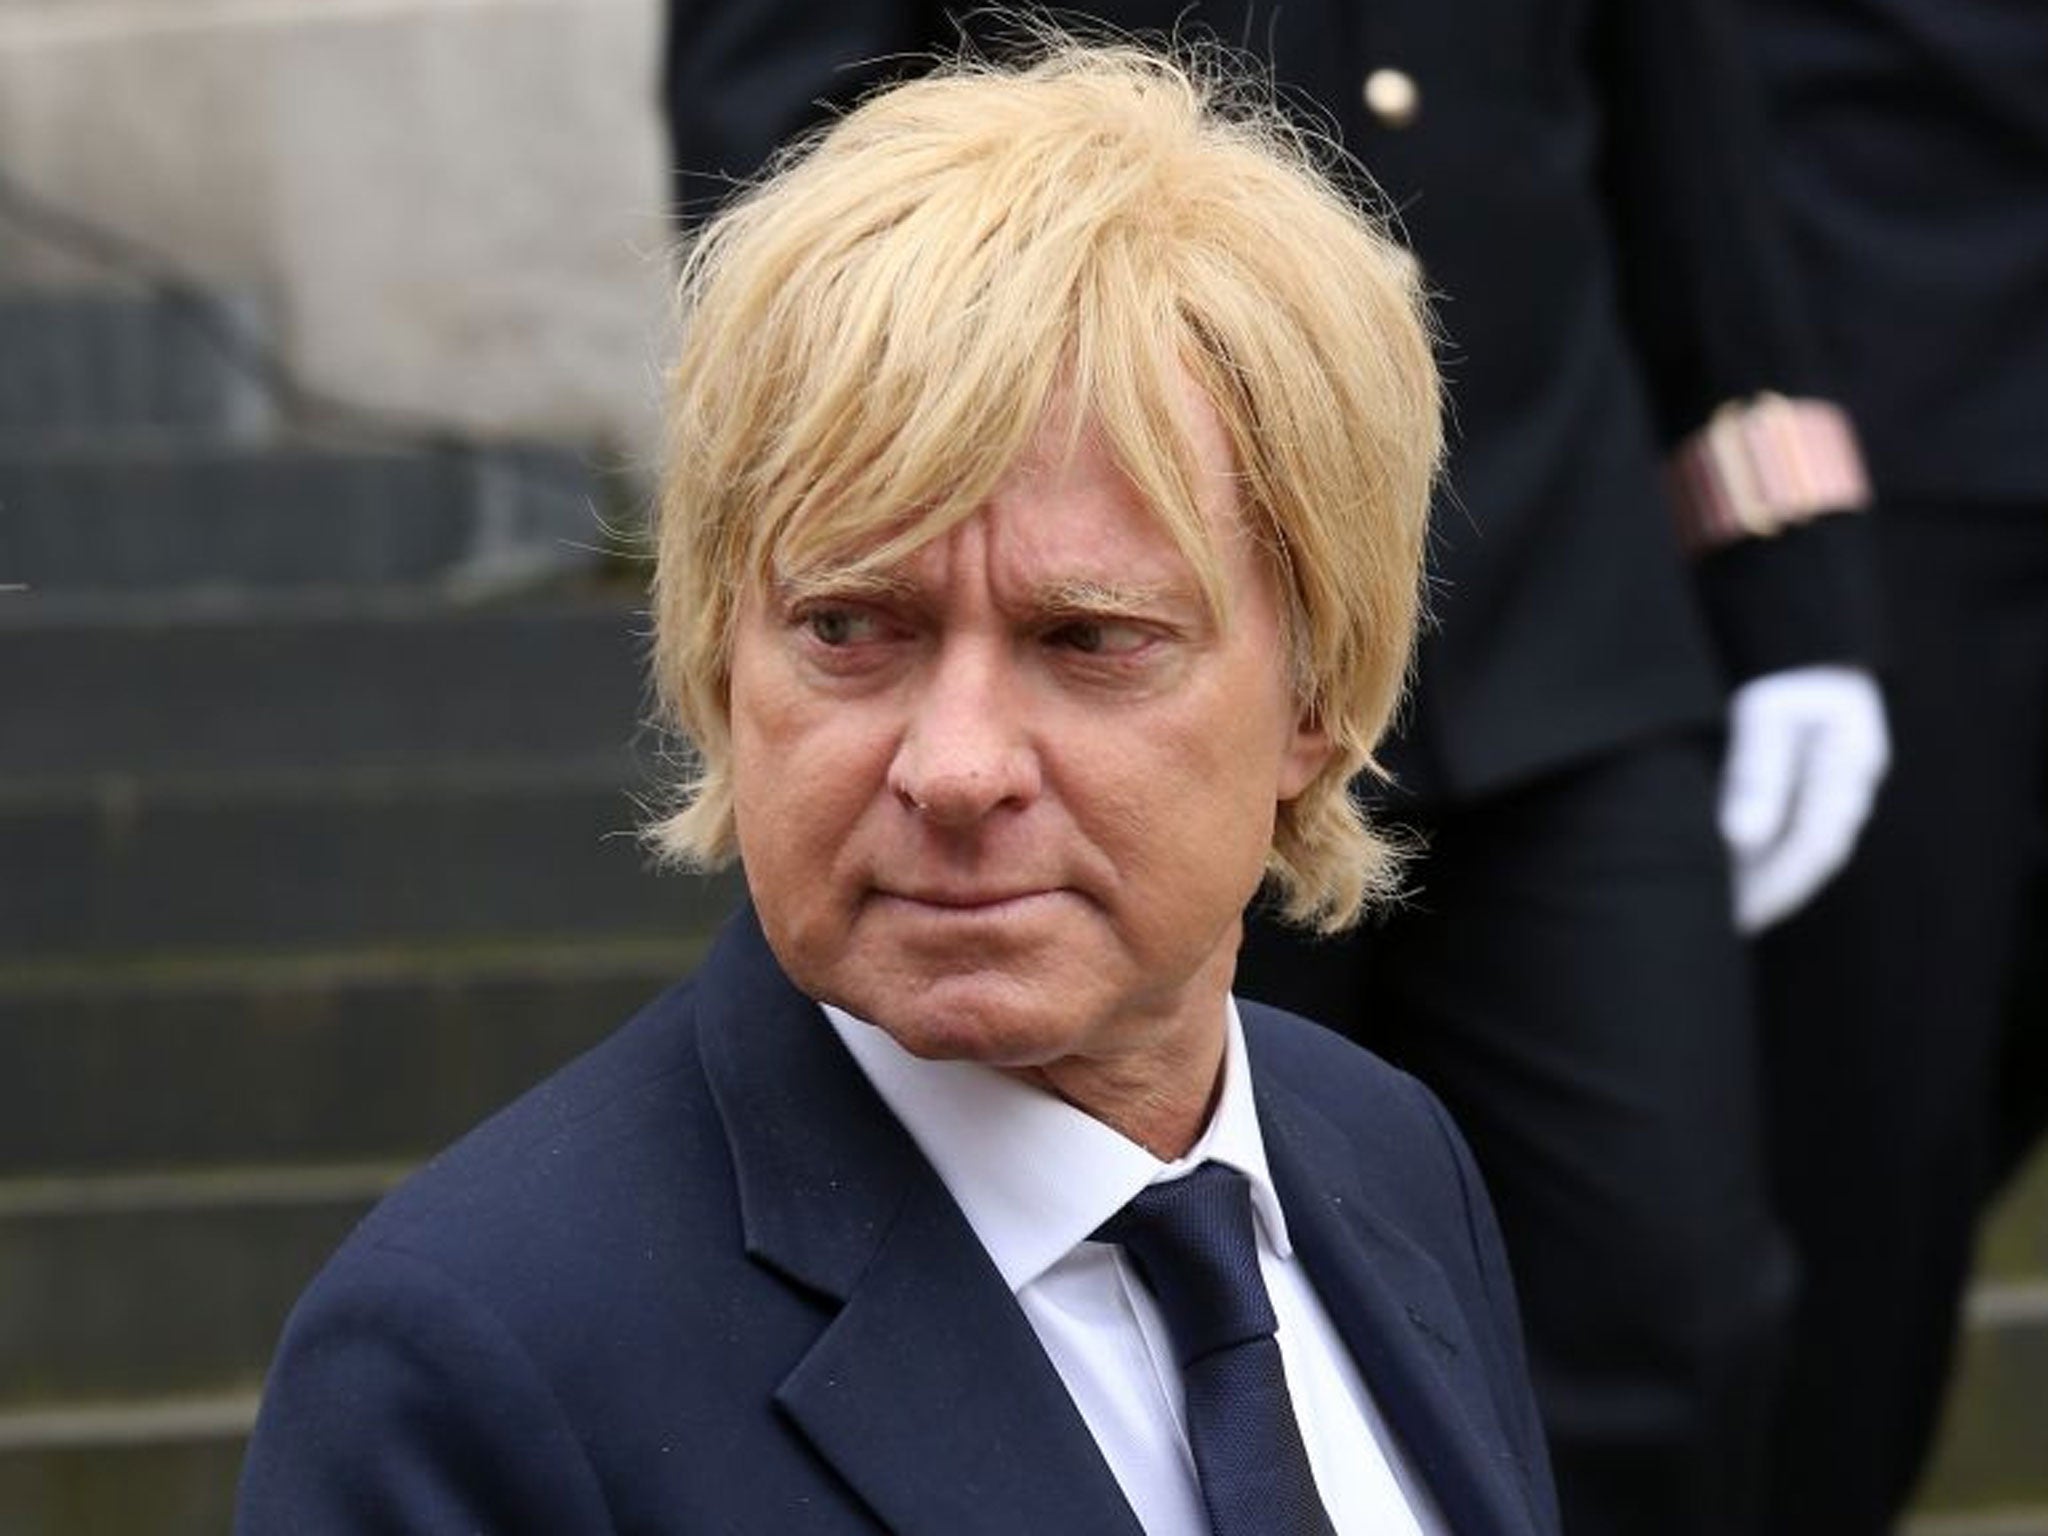 (FILE PHOTO) FILE - Conservative MP Michael Fabricant Apologies For 'Punch Journalist' Joke Tweeter Remark. LONDON, ENGLAND - APRIL 17: MP Michael Fabricant attends the Ceremonial funeral of former British Prime Minister Baroness Thatcher at St Paul's Ca